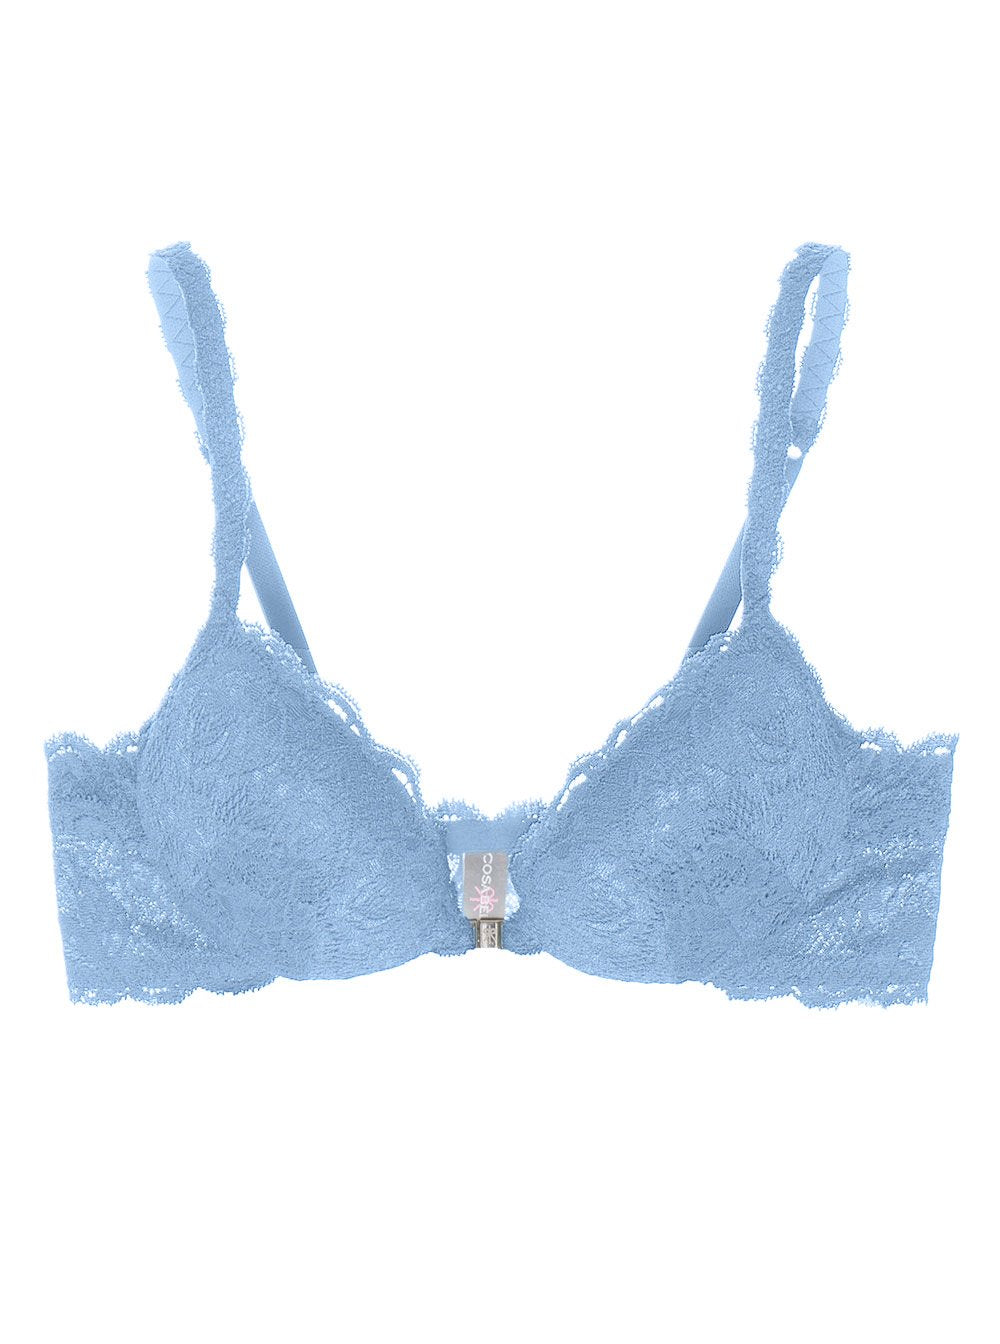 Cosabella, Never Say Never Sexie Push Up Bra